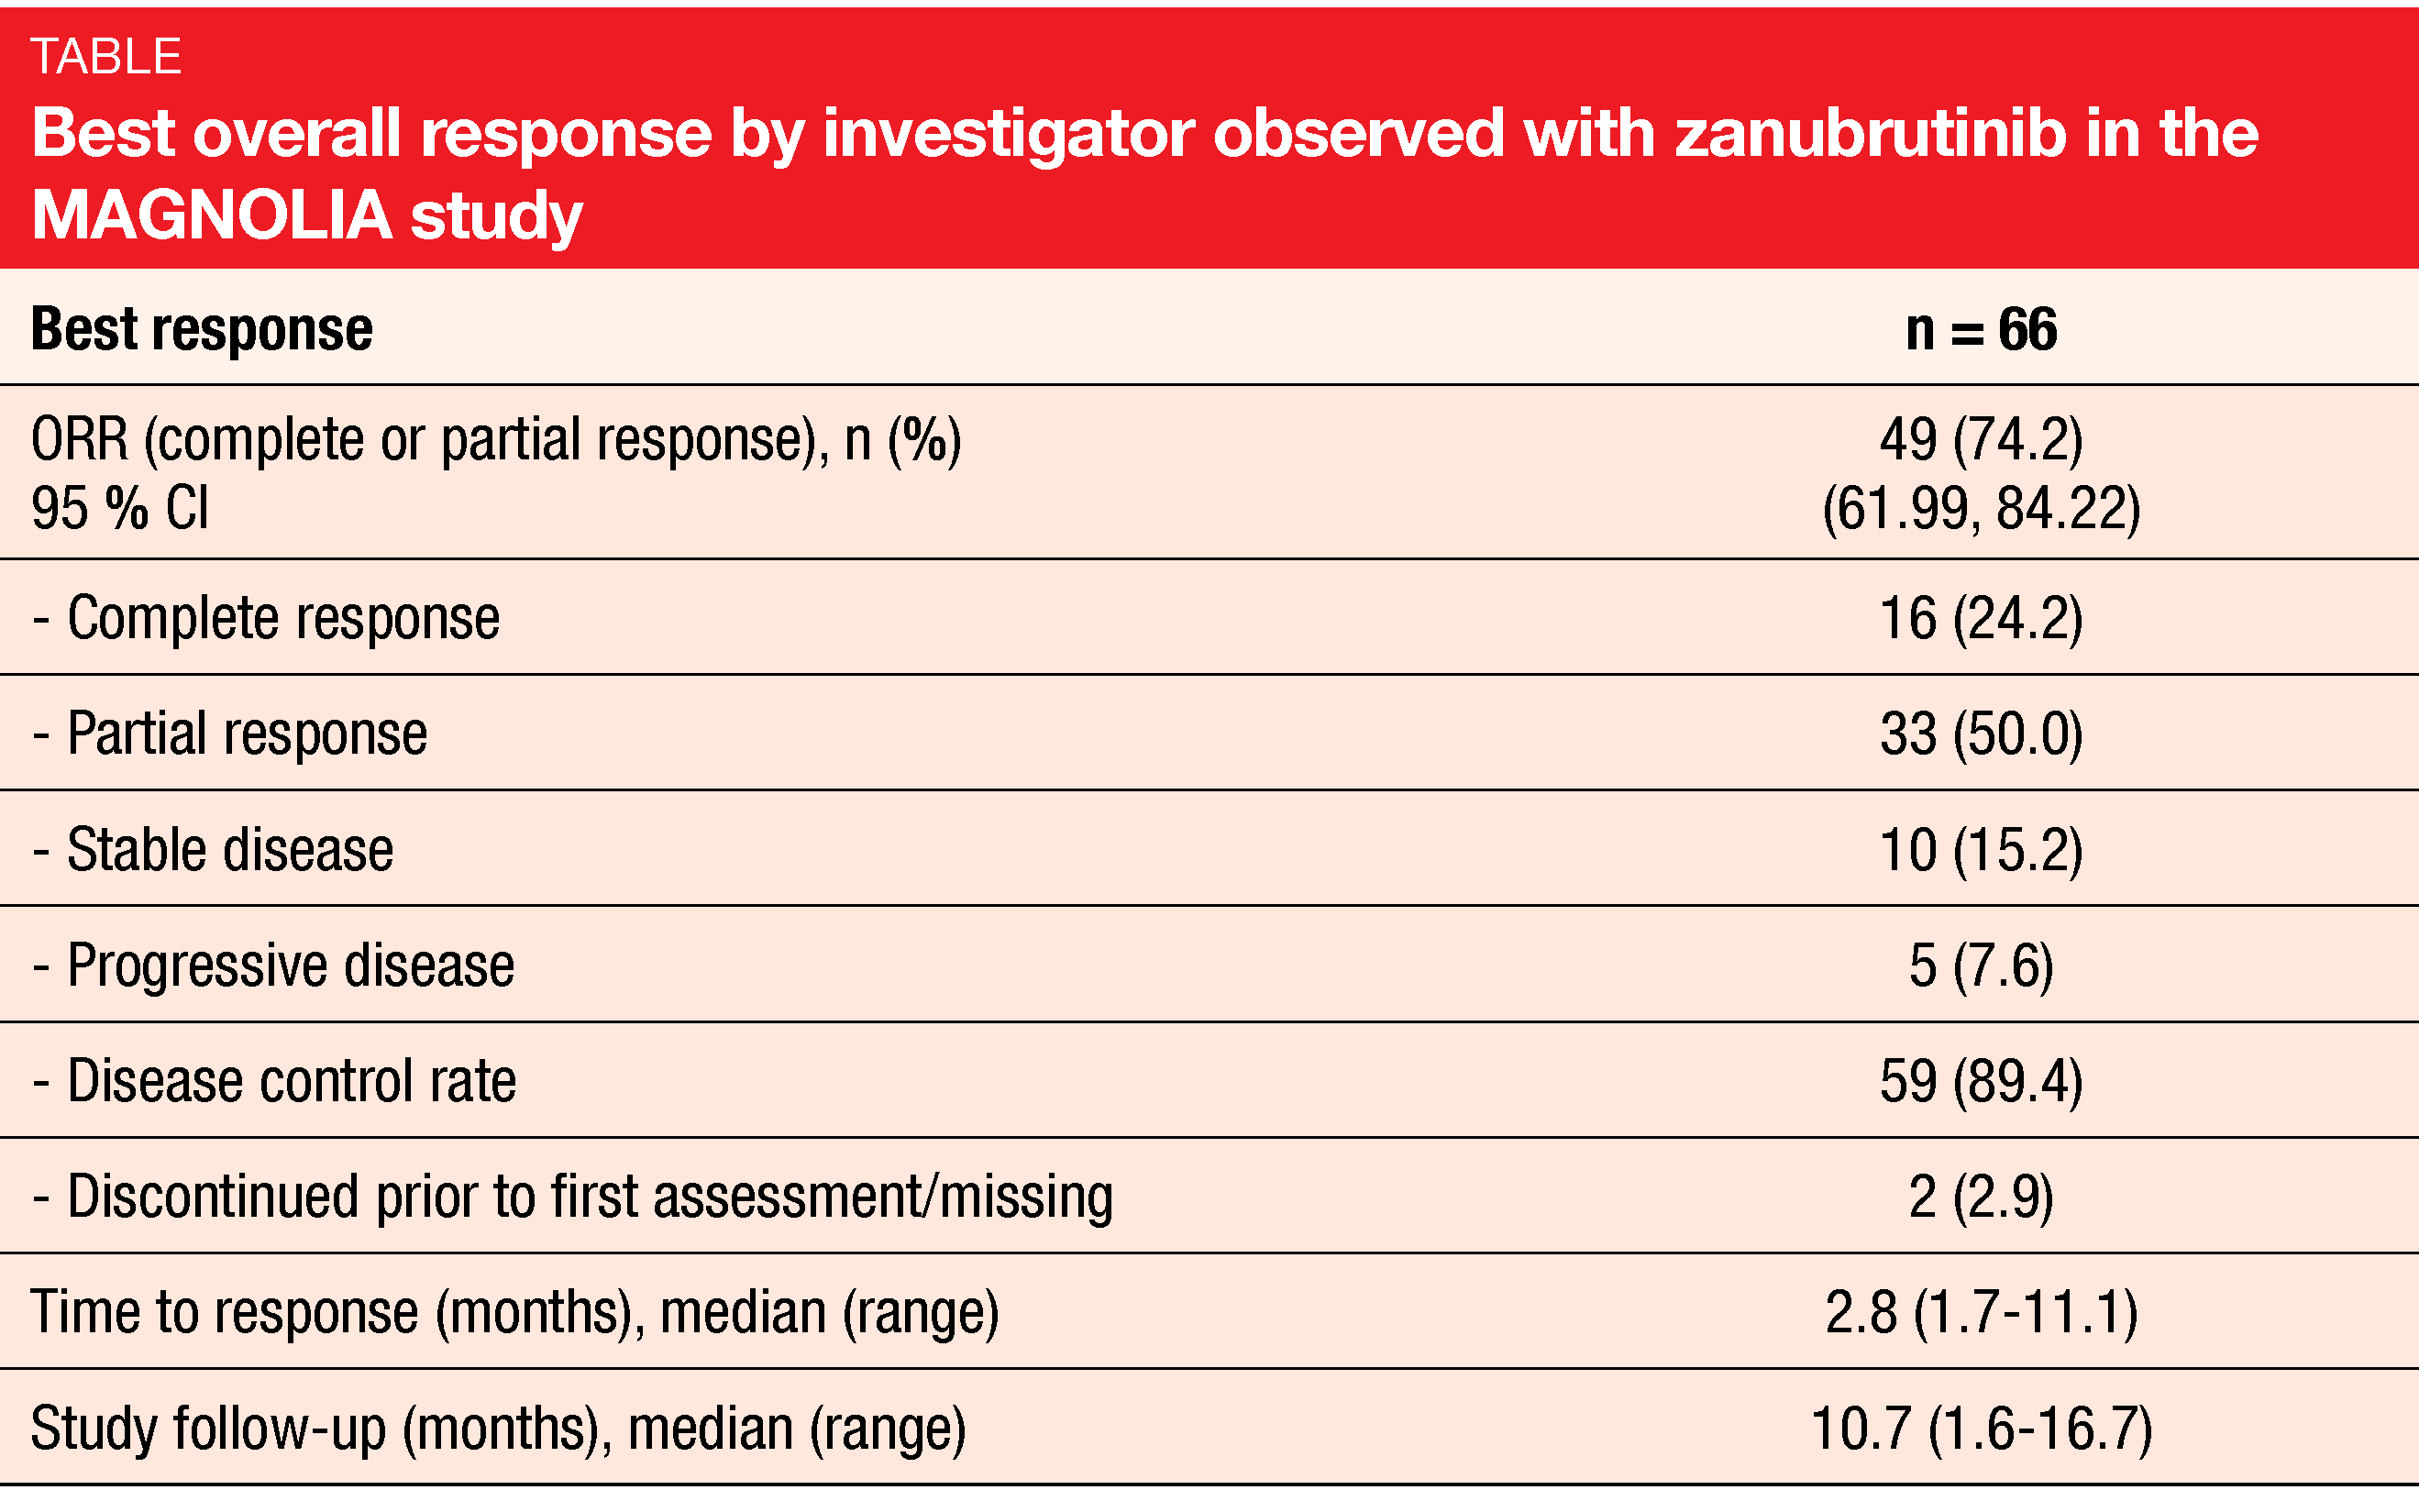 Table Best overall response by investigator observed with zanubrutinib in the MAGNOLIA study